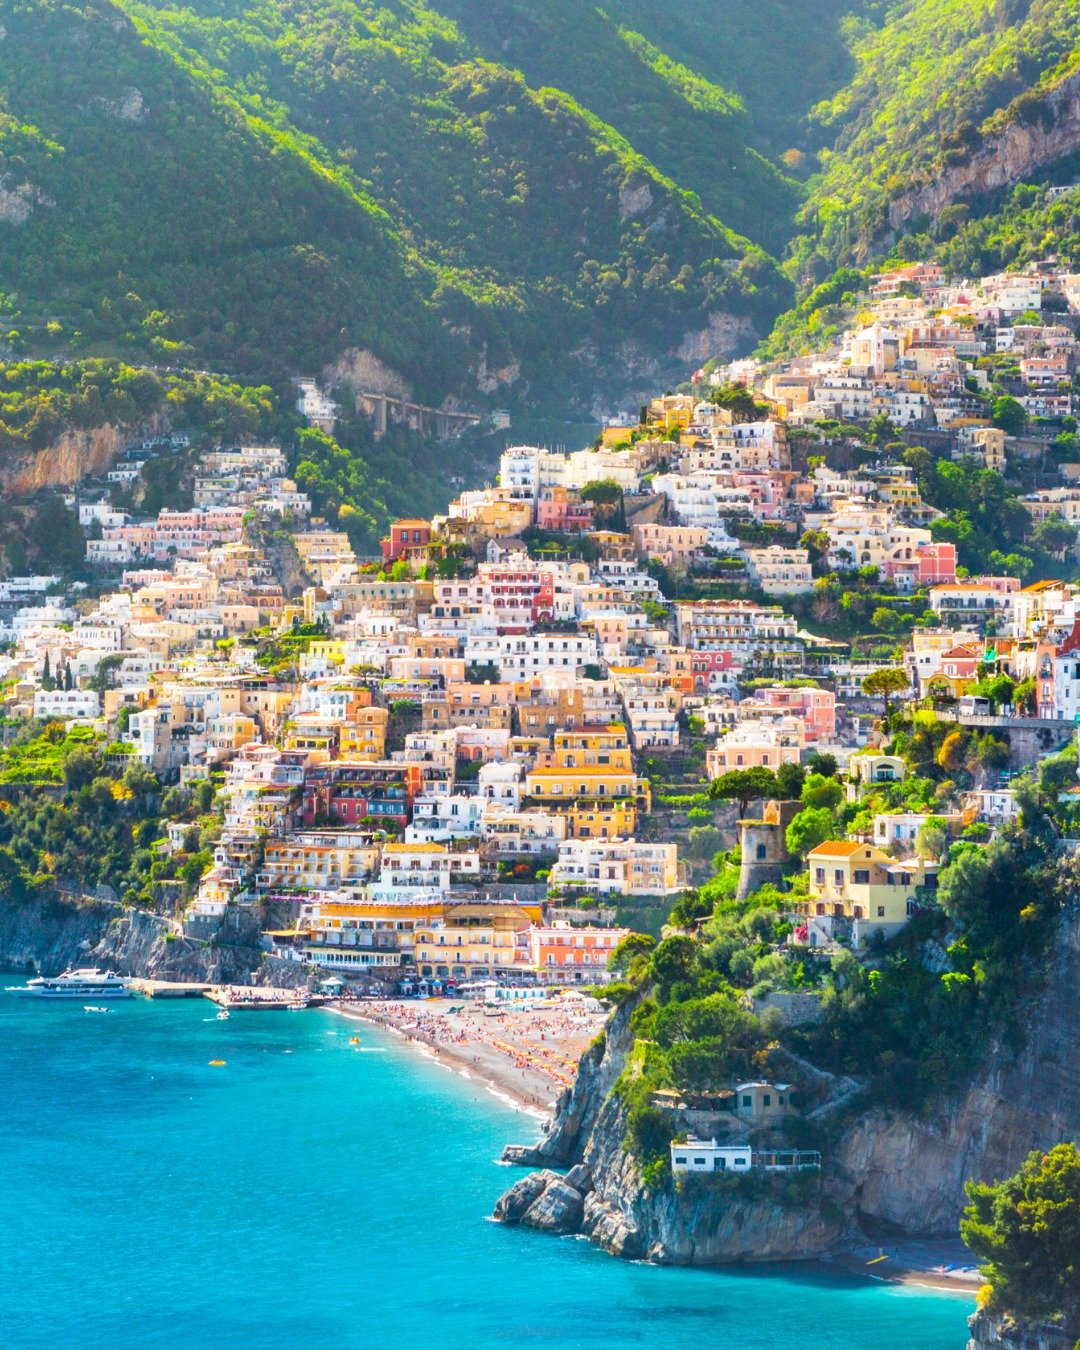 🌊 Experience the enchanting Amalfi Coast this summer! With its mild temperatures and fewer crowds, it&rsquo;s the perfect time to explore the picturesque seaside towns of Positano, Amalfi, and Ravello.

Hike the scenic Sentiero degli Dei, indulge in